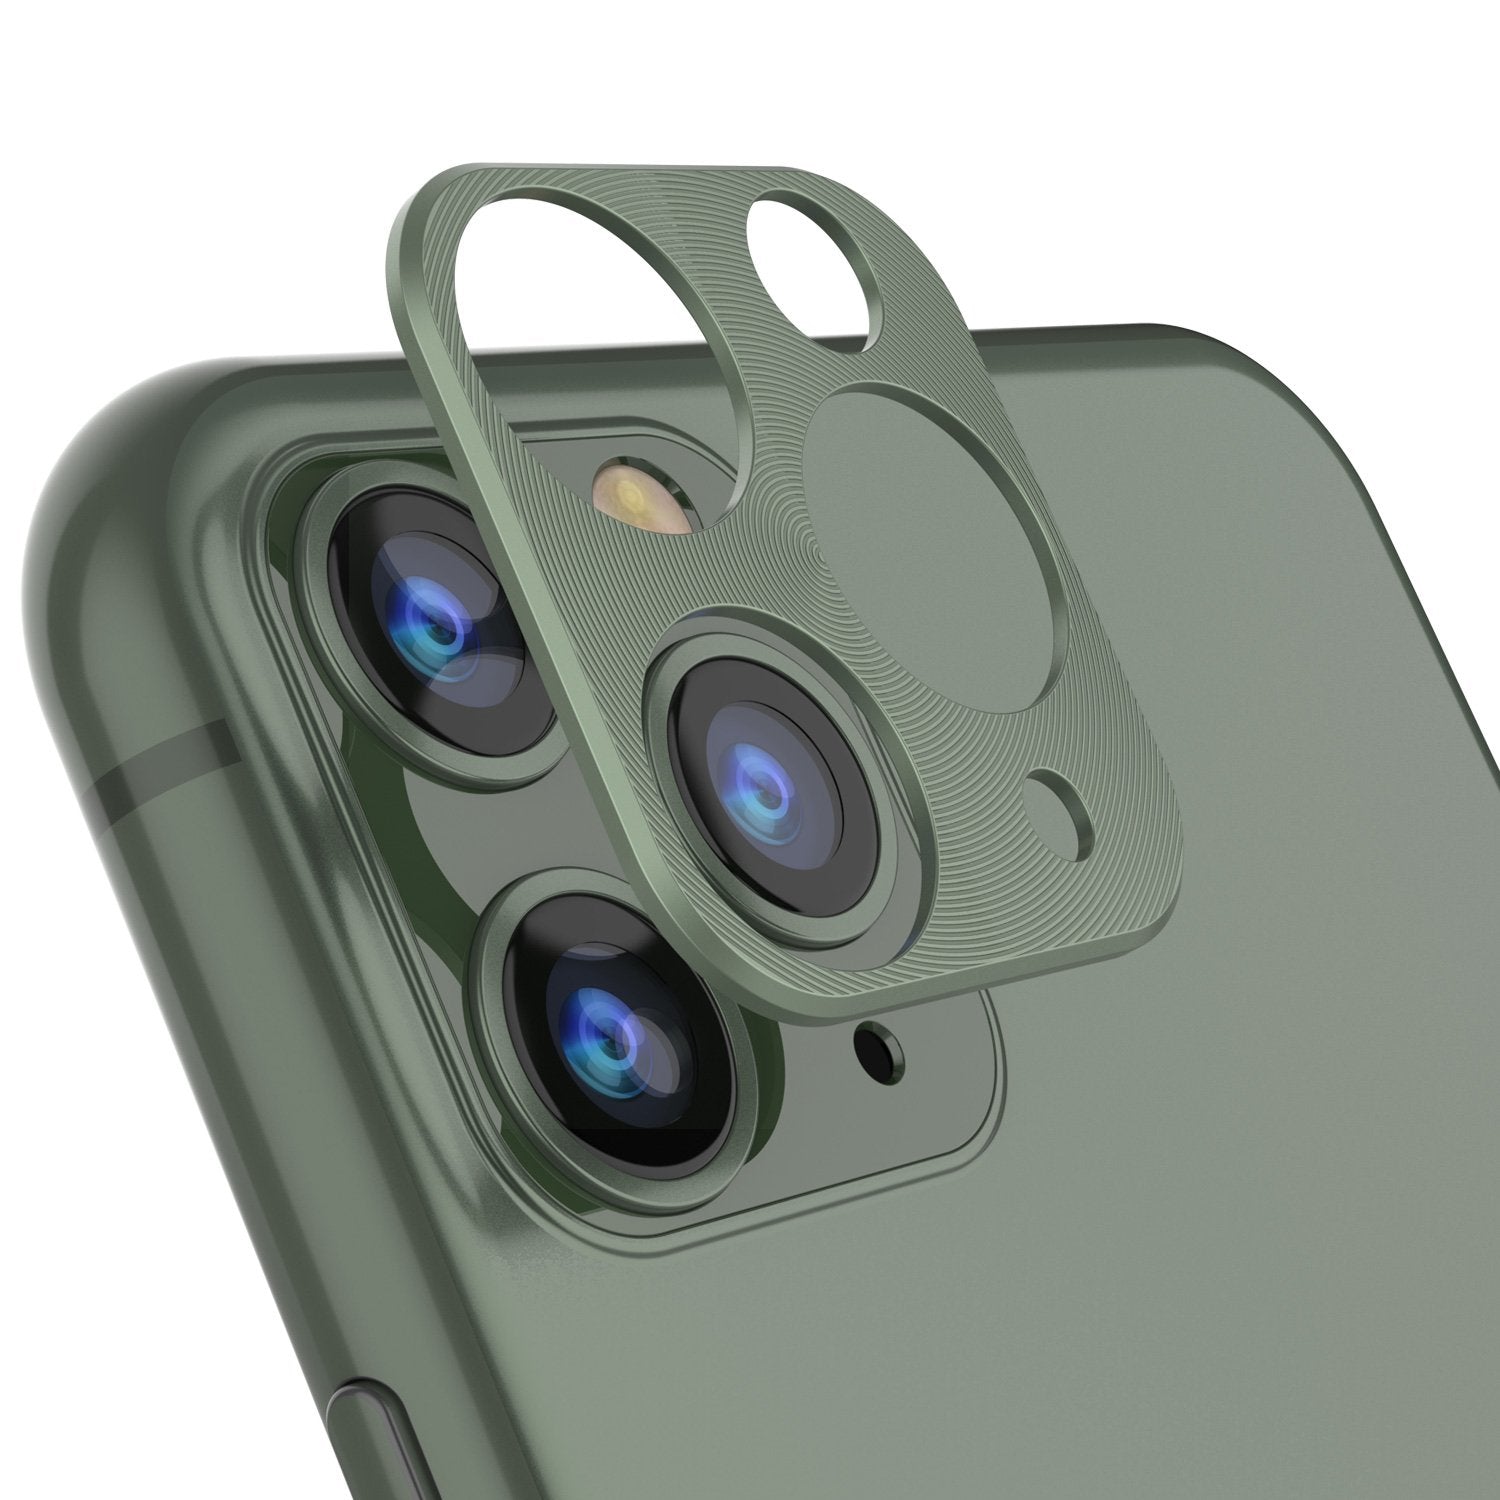 Punkcase iPhone 11 Pro Max Camera Protector Ring [Green]